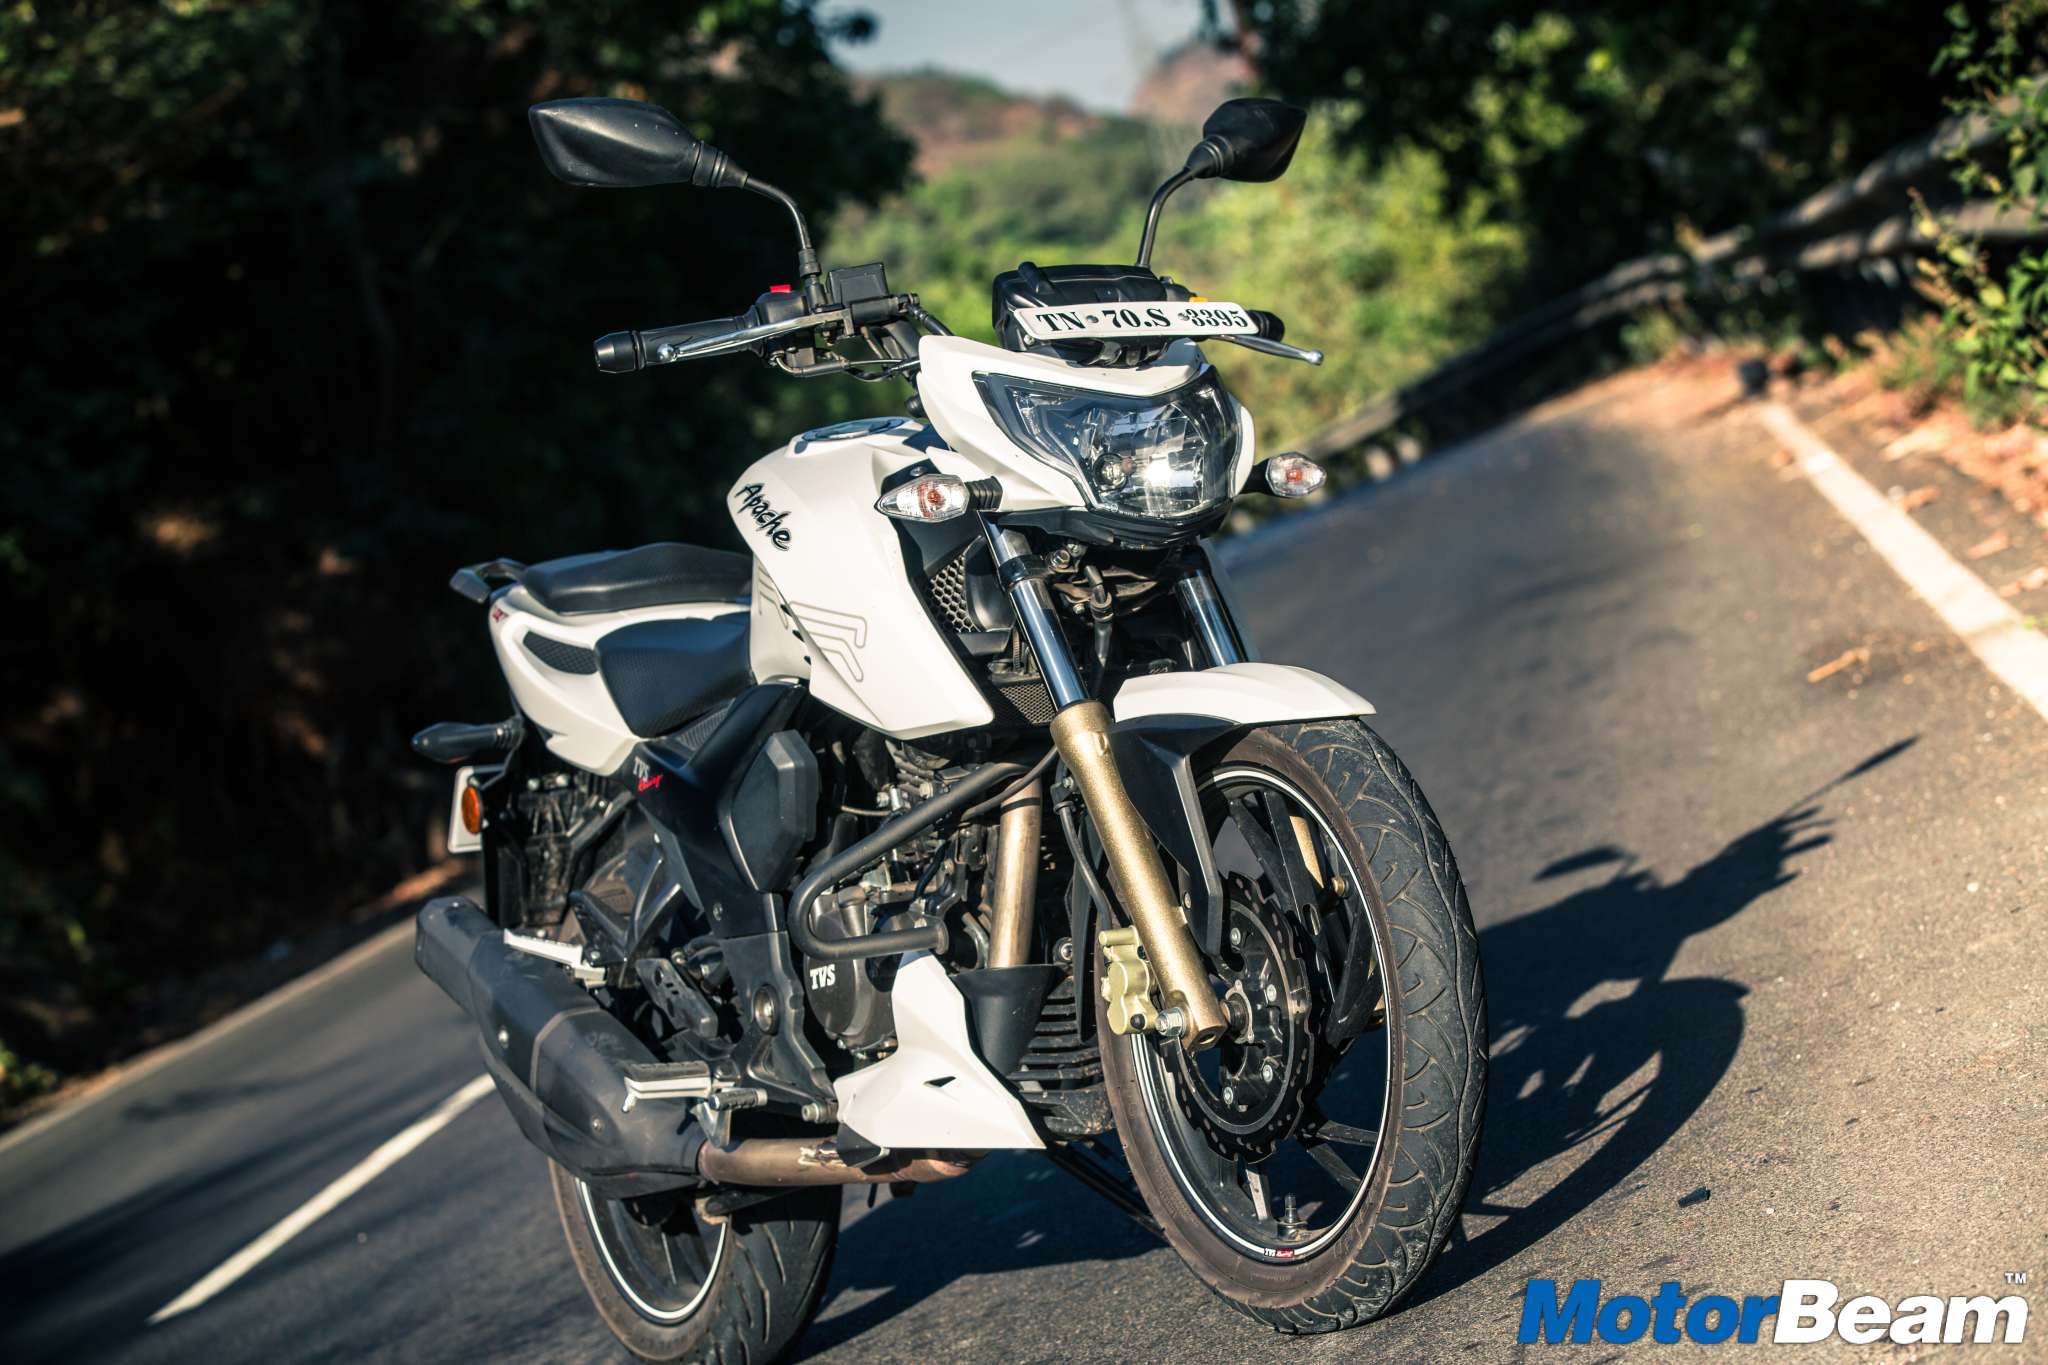 Tvs Apache 200 Abs Not Launched Company Denies Sales Motorbeam